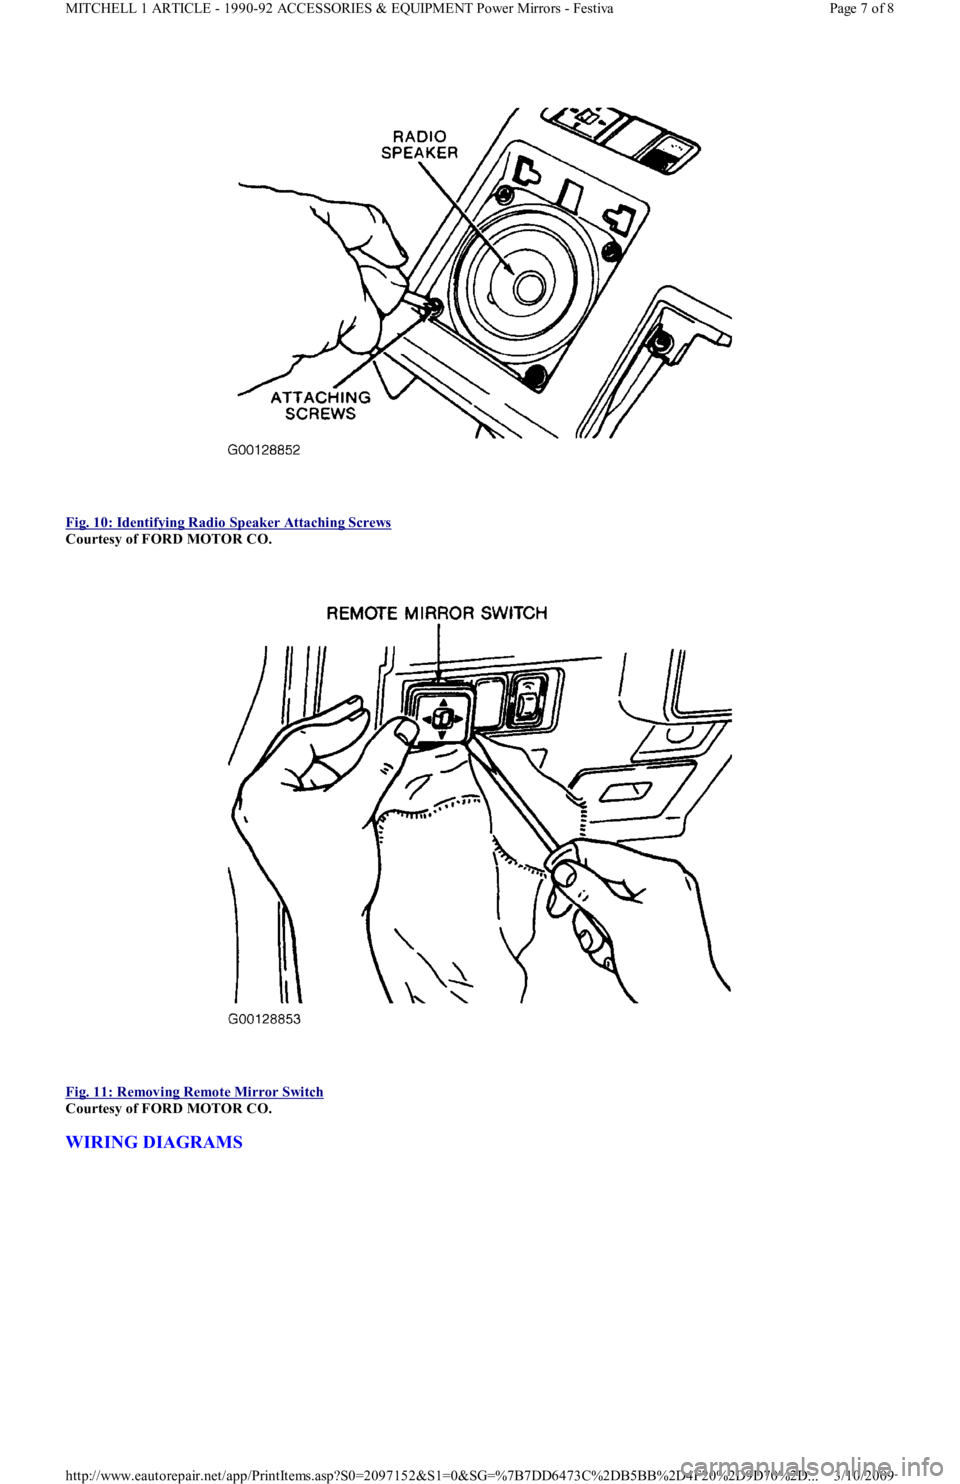 FORD FESTIVA 1991 User Guide  
Fig. 10: Identifying Radio Speaker Attaching Screws
 
Courtesy of FORD MOTOR CO. 
 
Fig. 11: Removing Remote Mirror Switch
 
Courtesy of FORD MOTOR CO. 
WIRING DIAGRAMS 
Page 7 of 8 MITCHELL 1 ARTIC